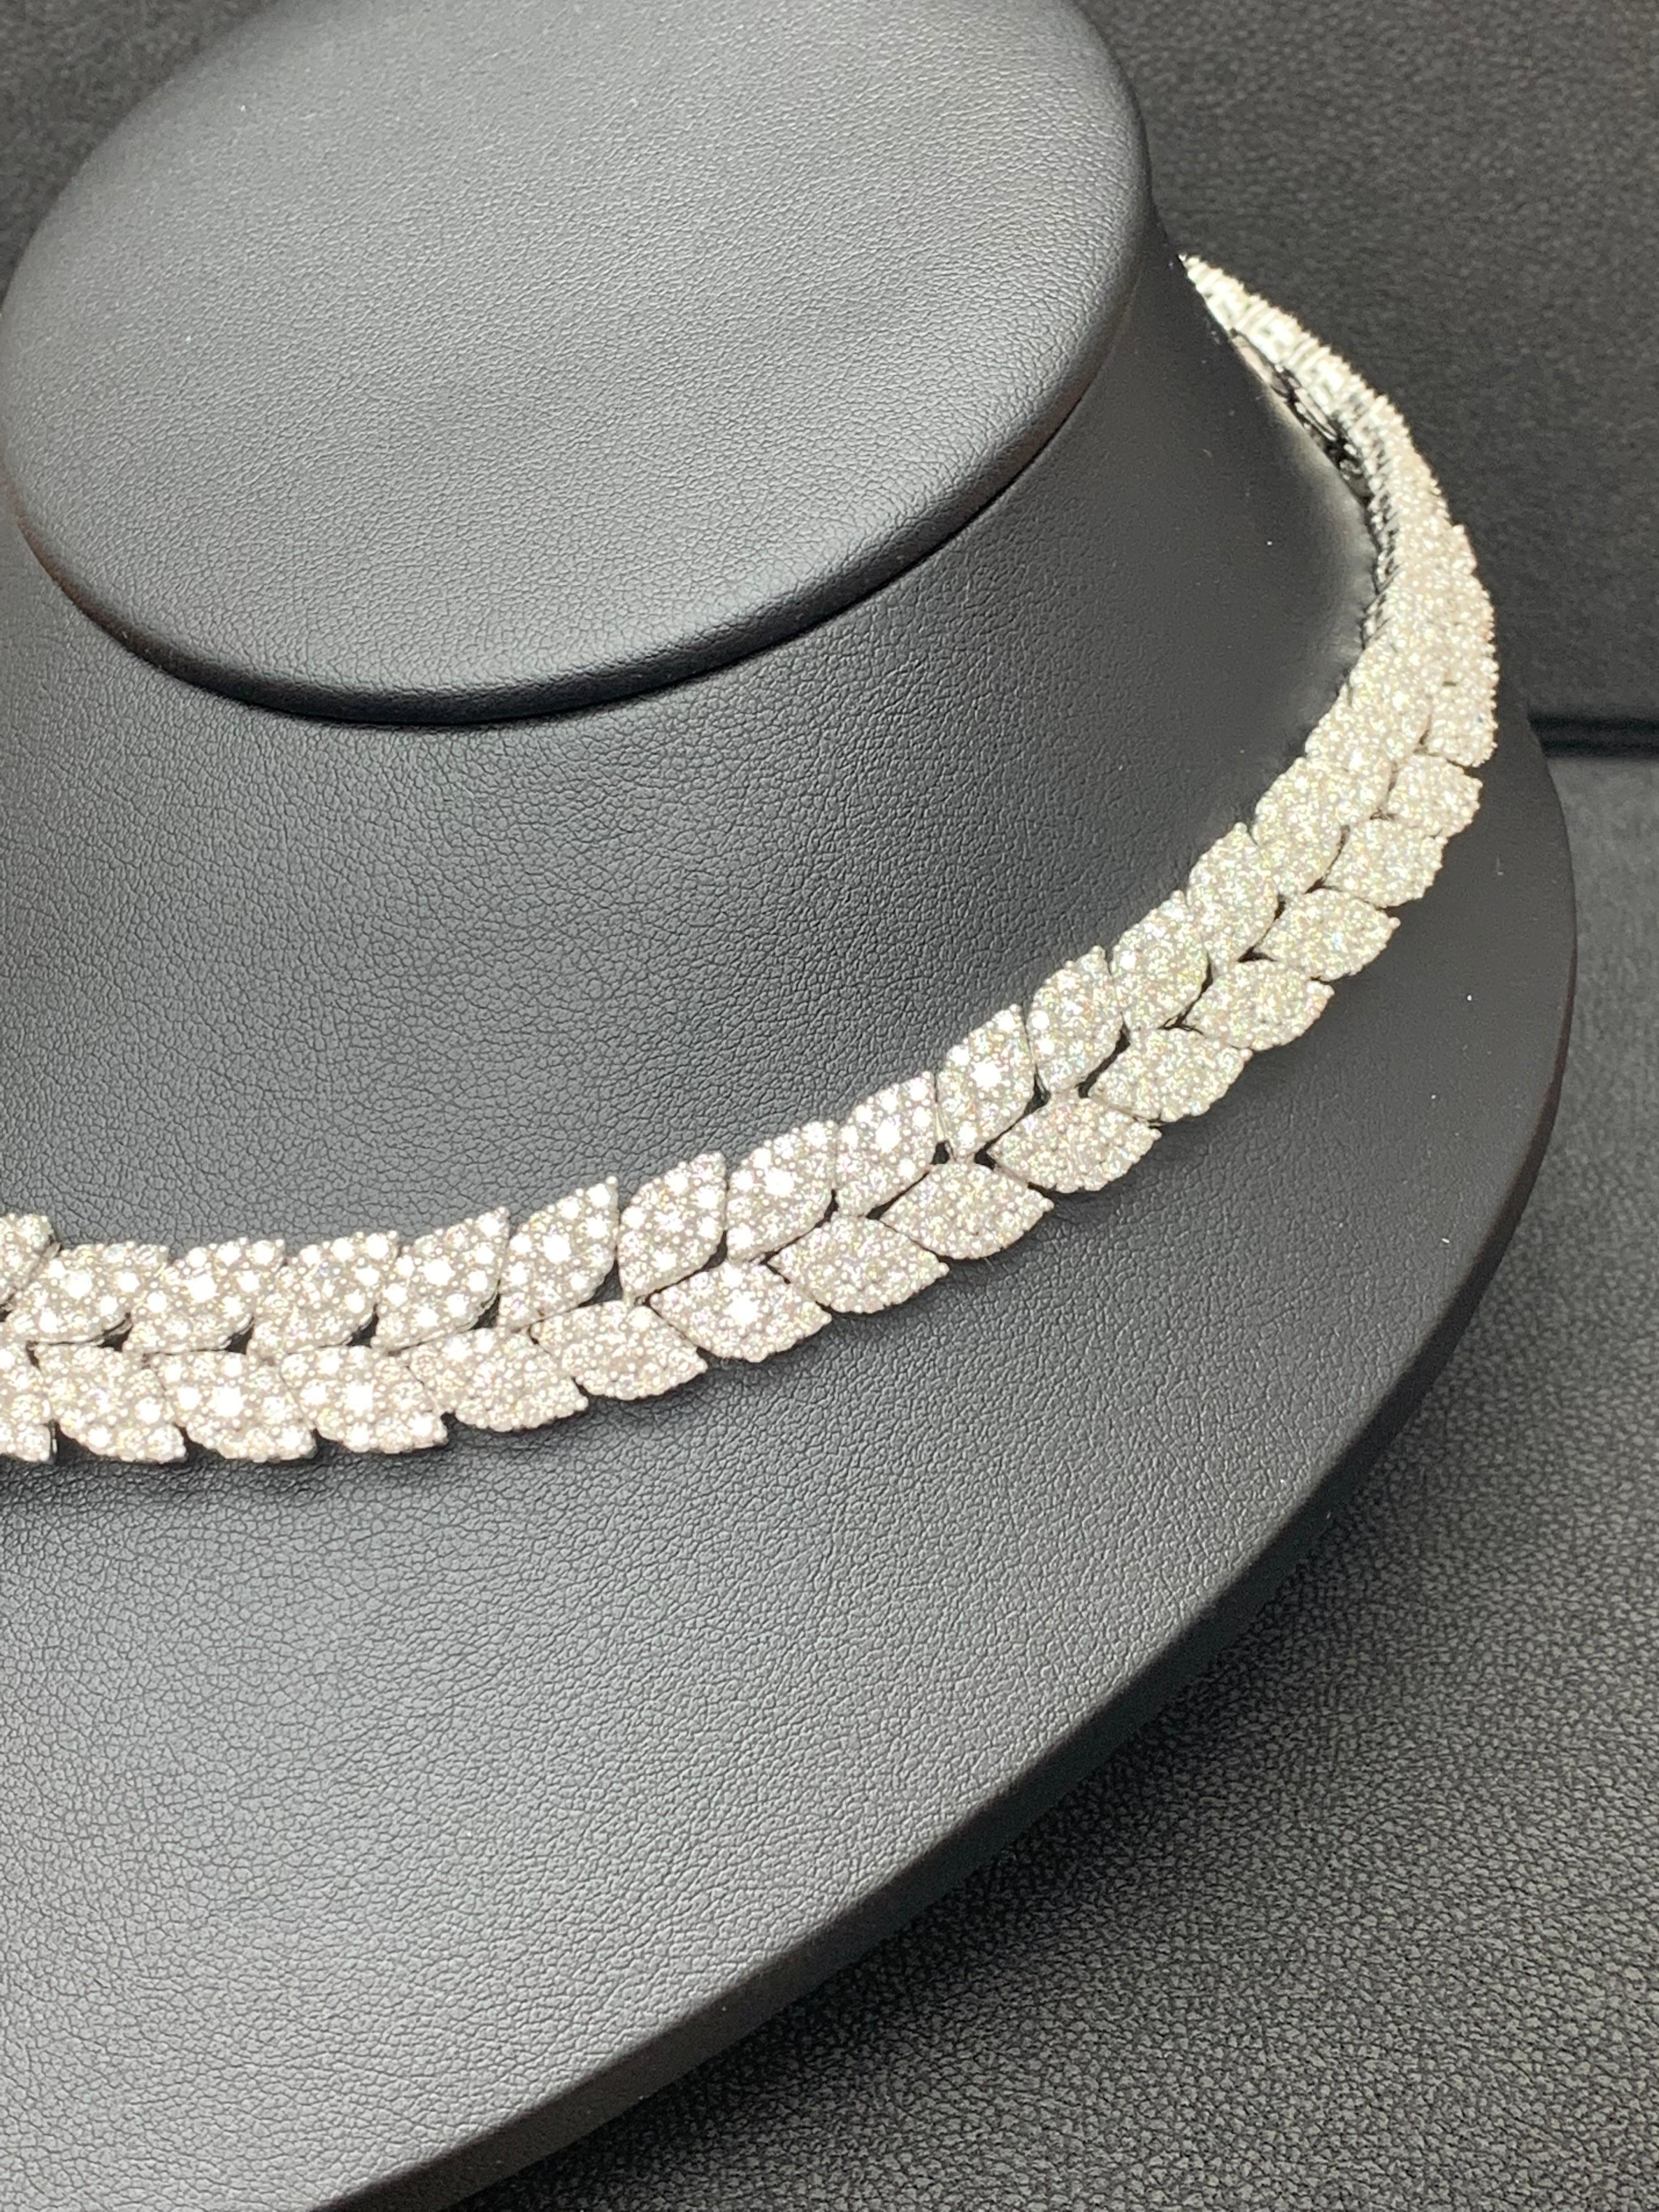 Contemporary 39.58 Carat Cluster Diamond Necklace in 18K White Gold For Sale